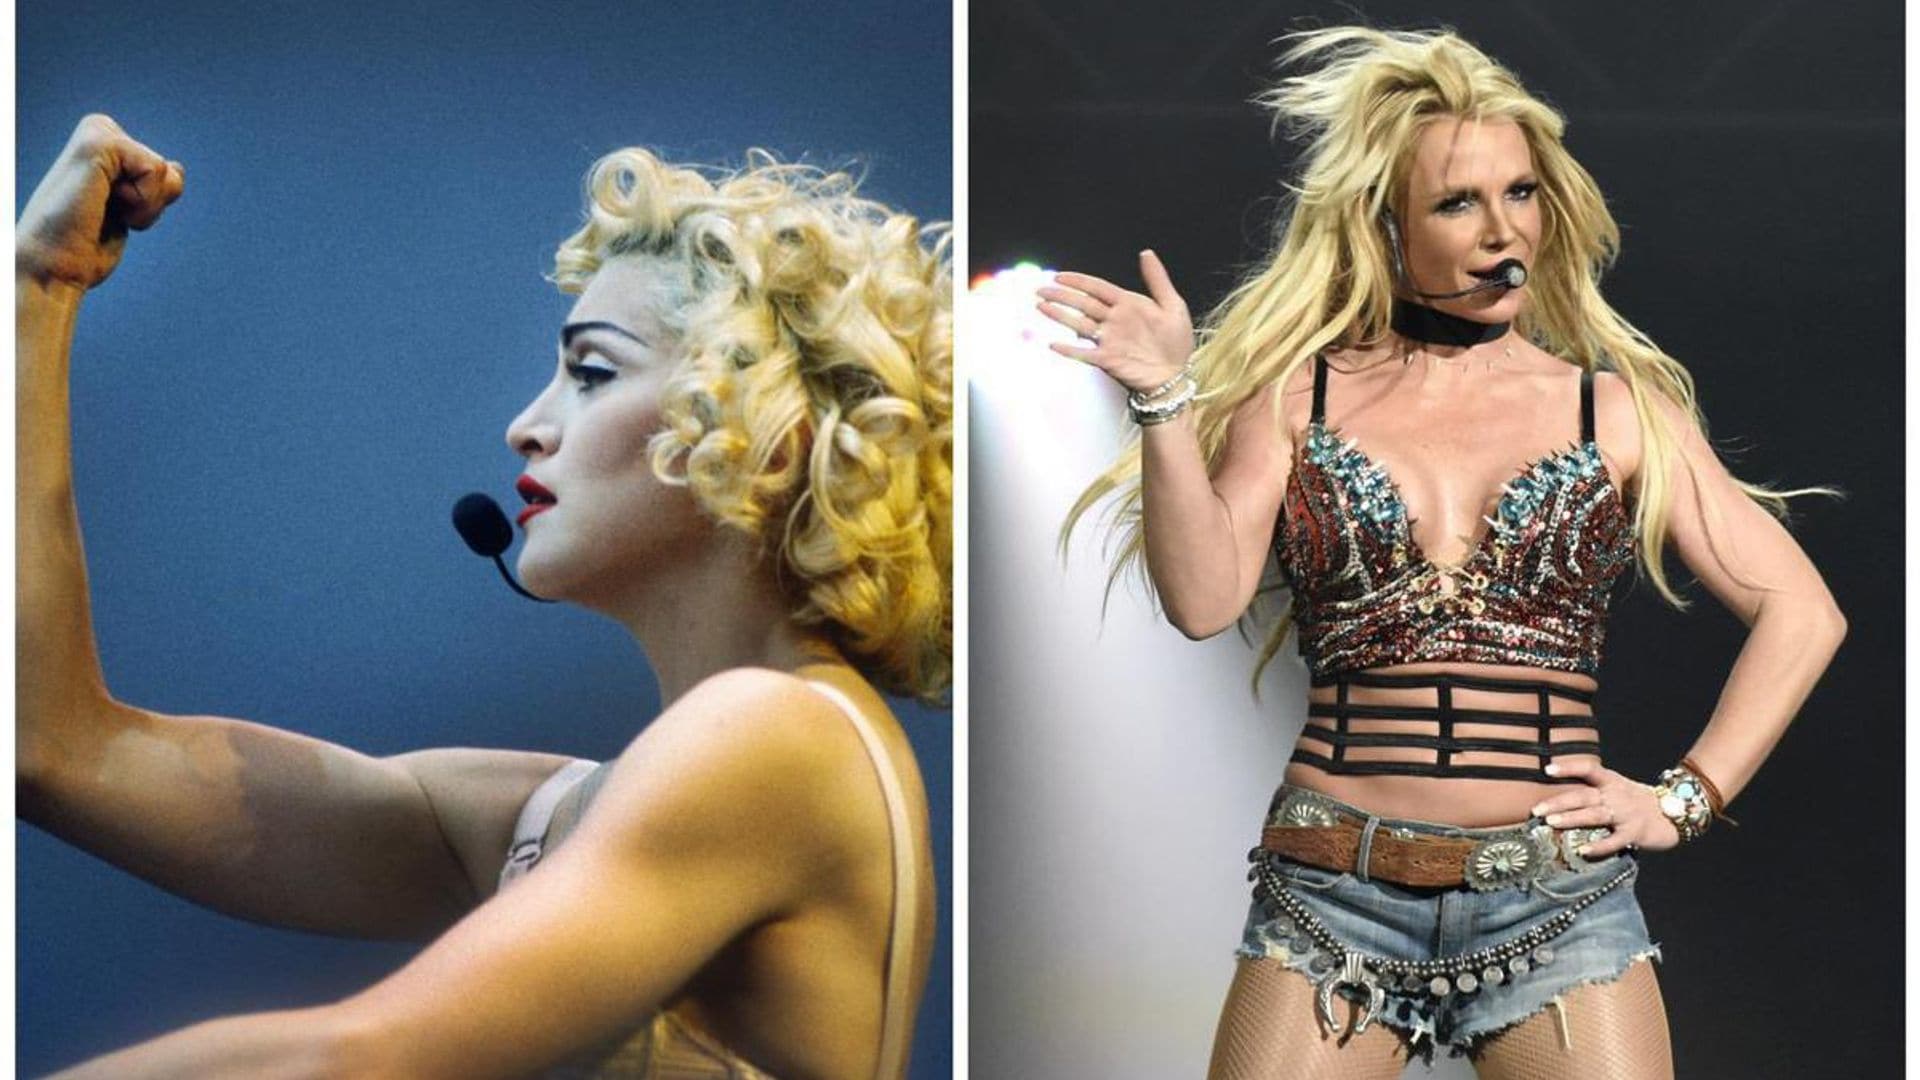 Madonna is pushing to make music with her close friend Britney Spears